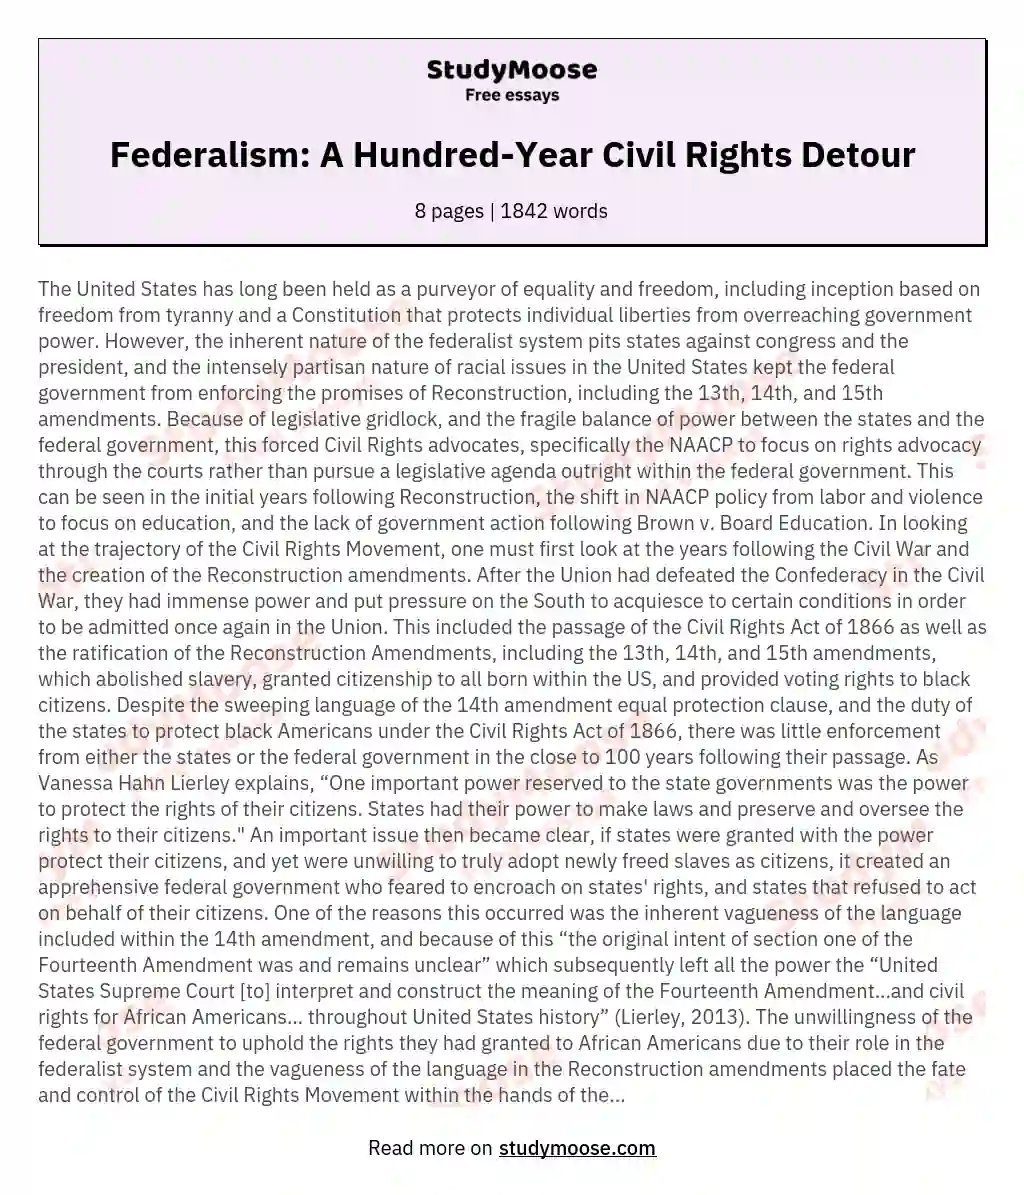 Federalism: A Hundred-Year Civil Rights Detour essay